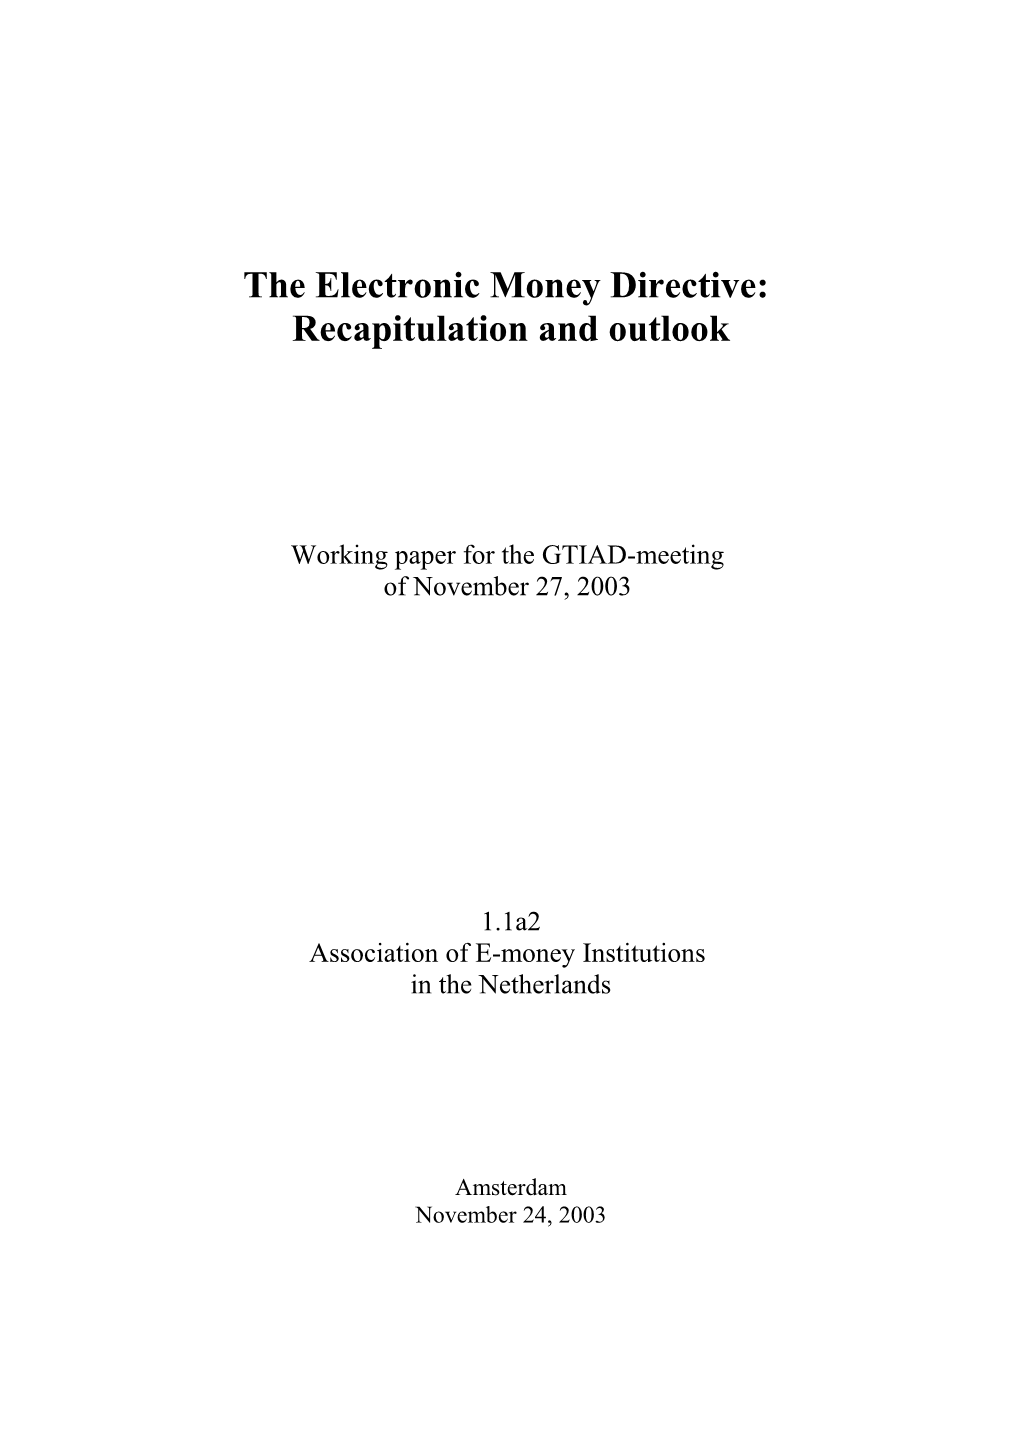 The EMI-Directive: Recapitulation and Outlook